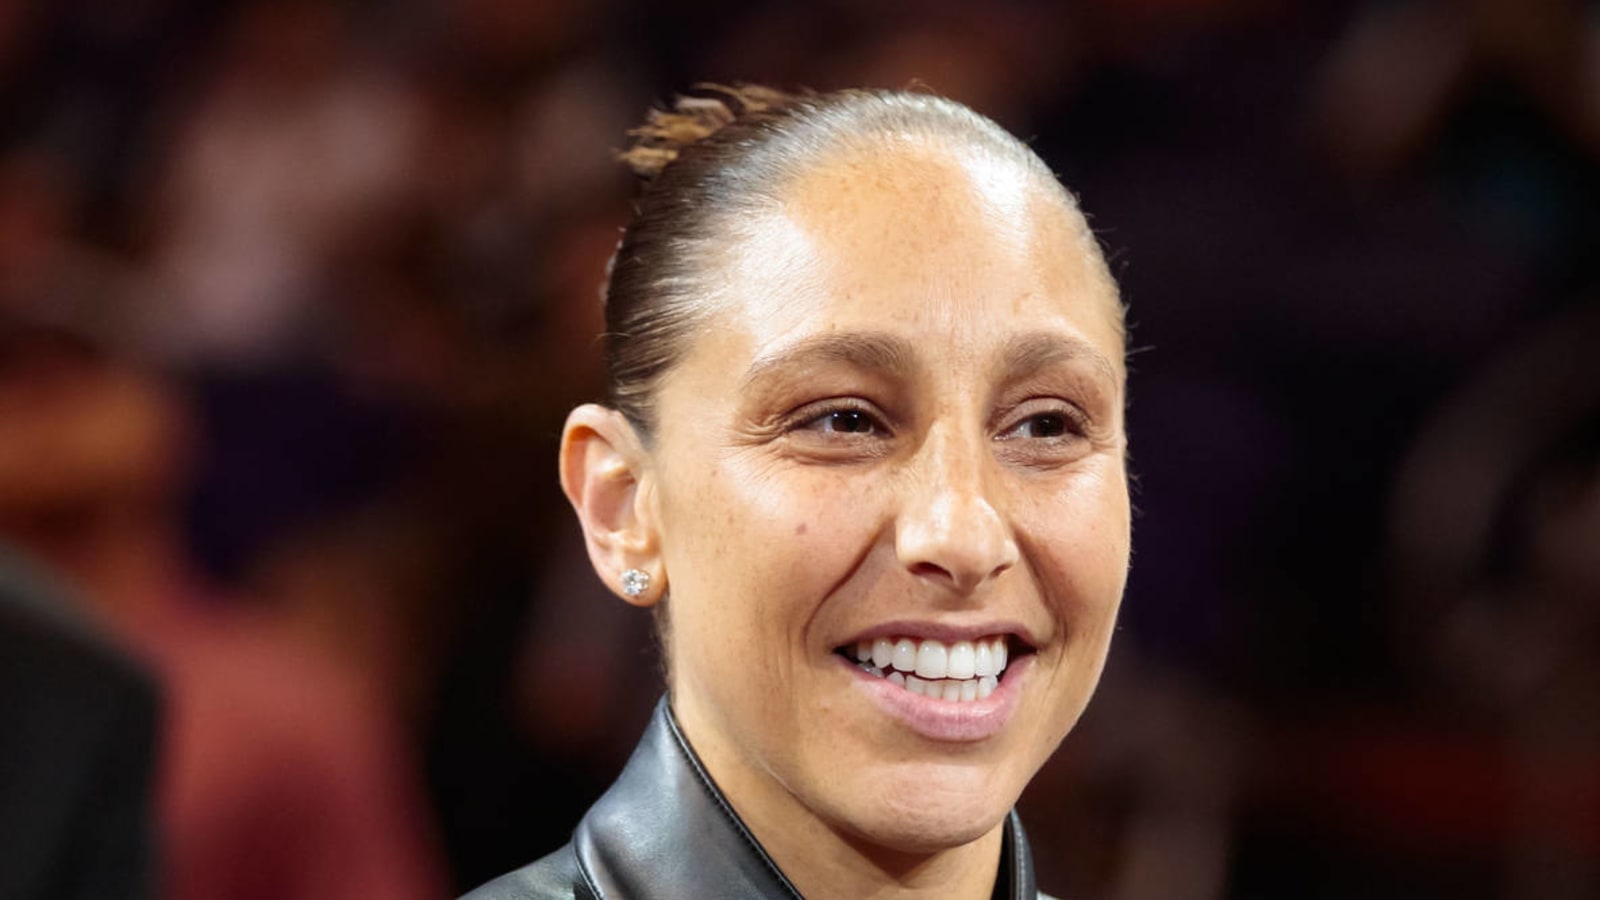 Watch: Mercury star Diana Taurasi with incredible no-look dime against Dream